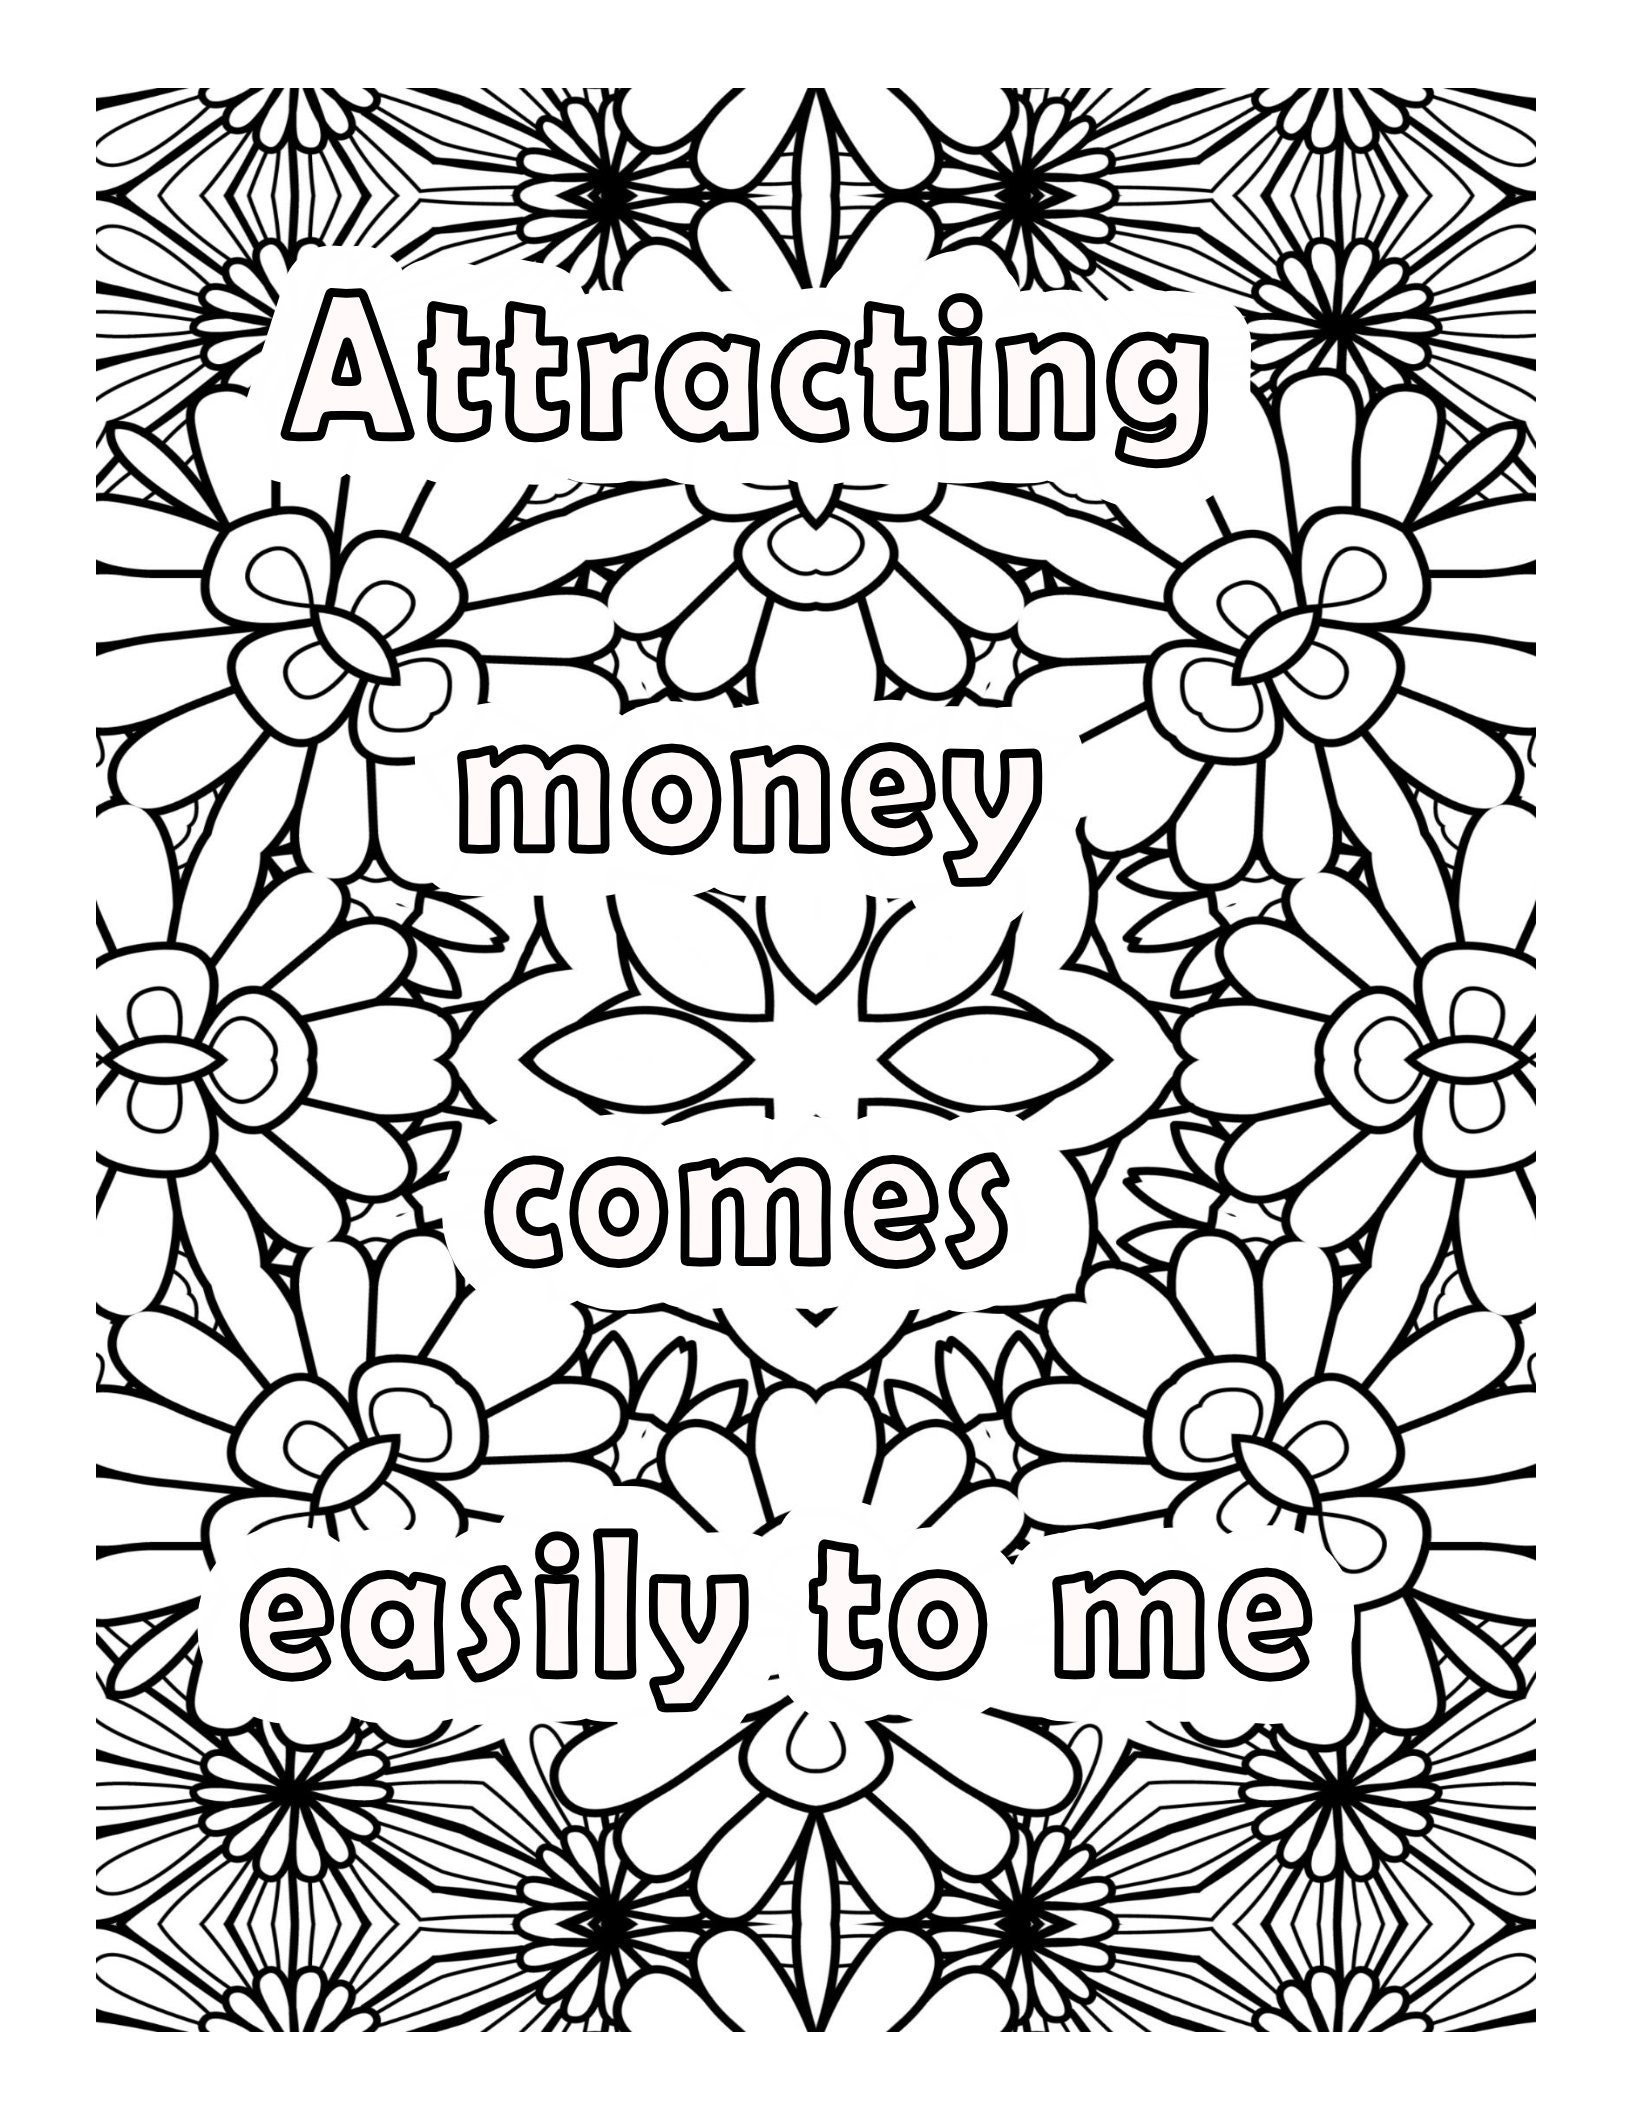 Manifest money and abundance with affirmation word coloring pages adult coloring book printable download manifest money instant download